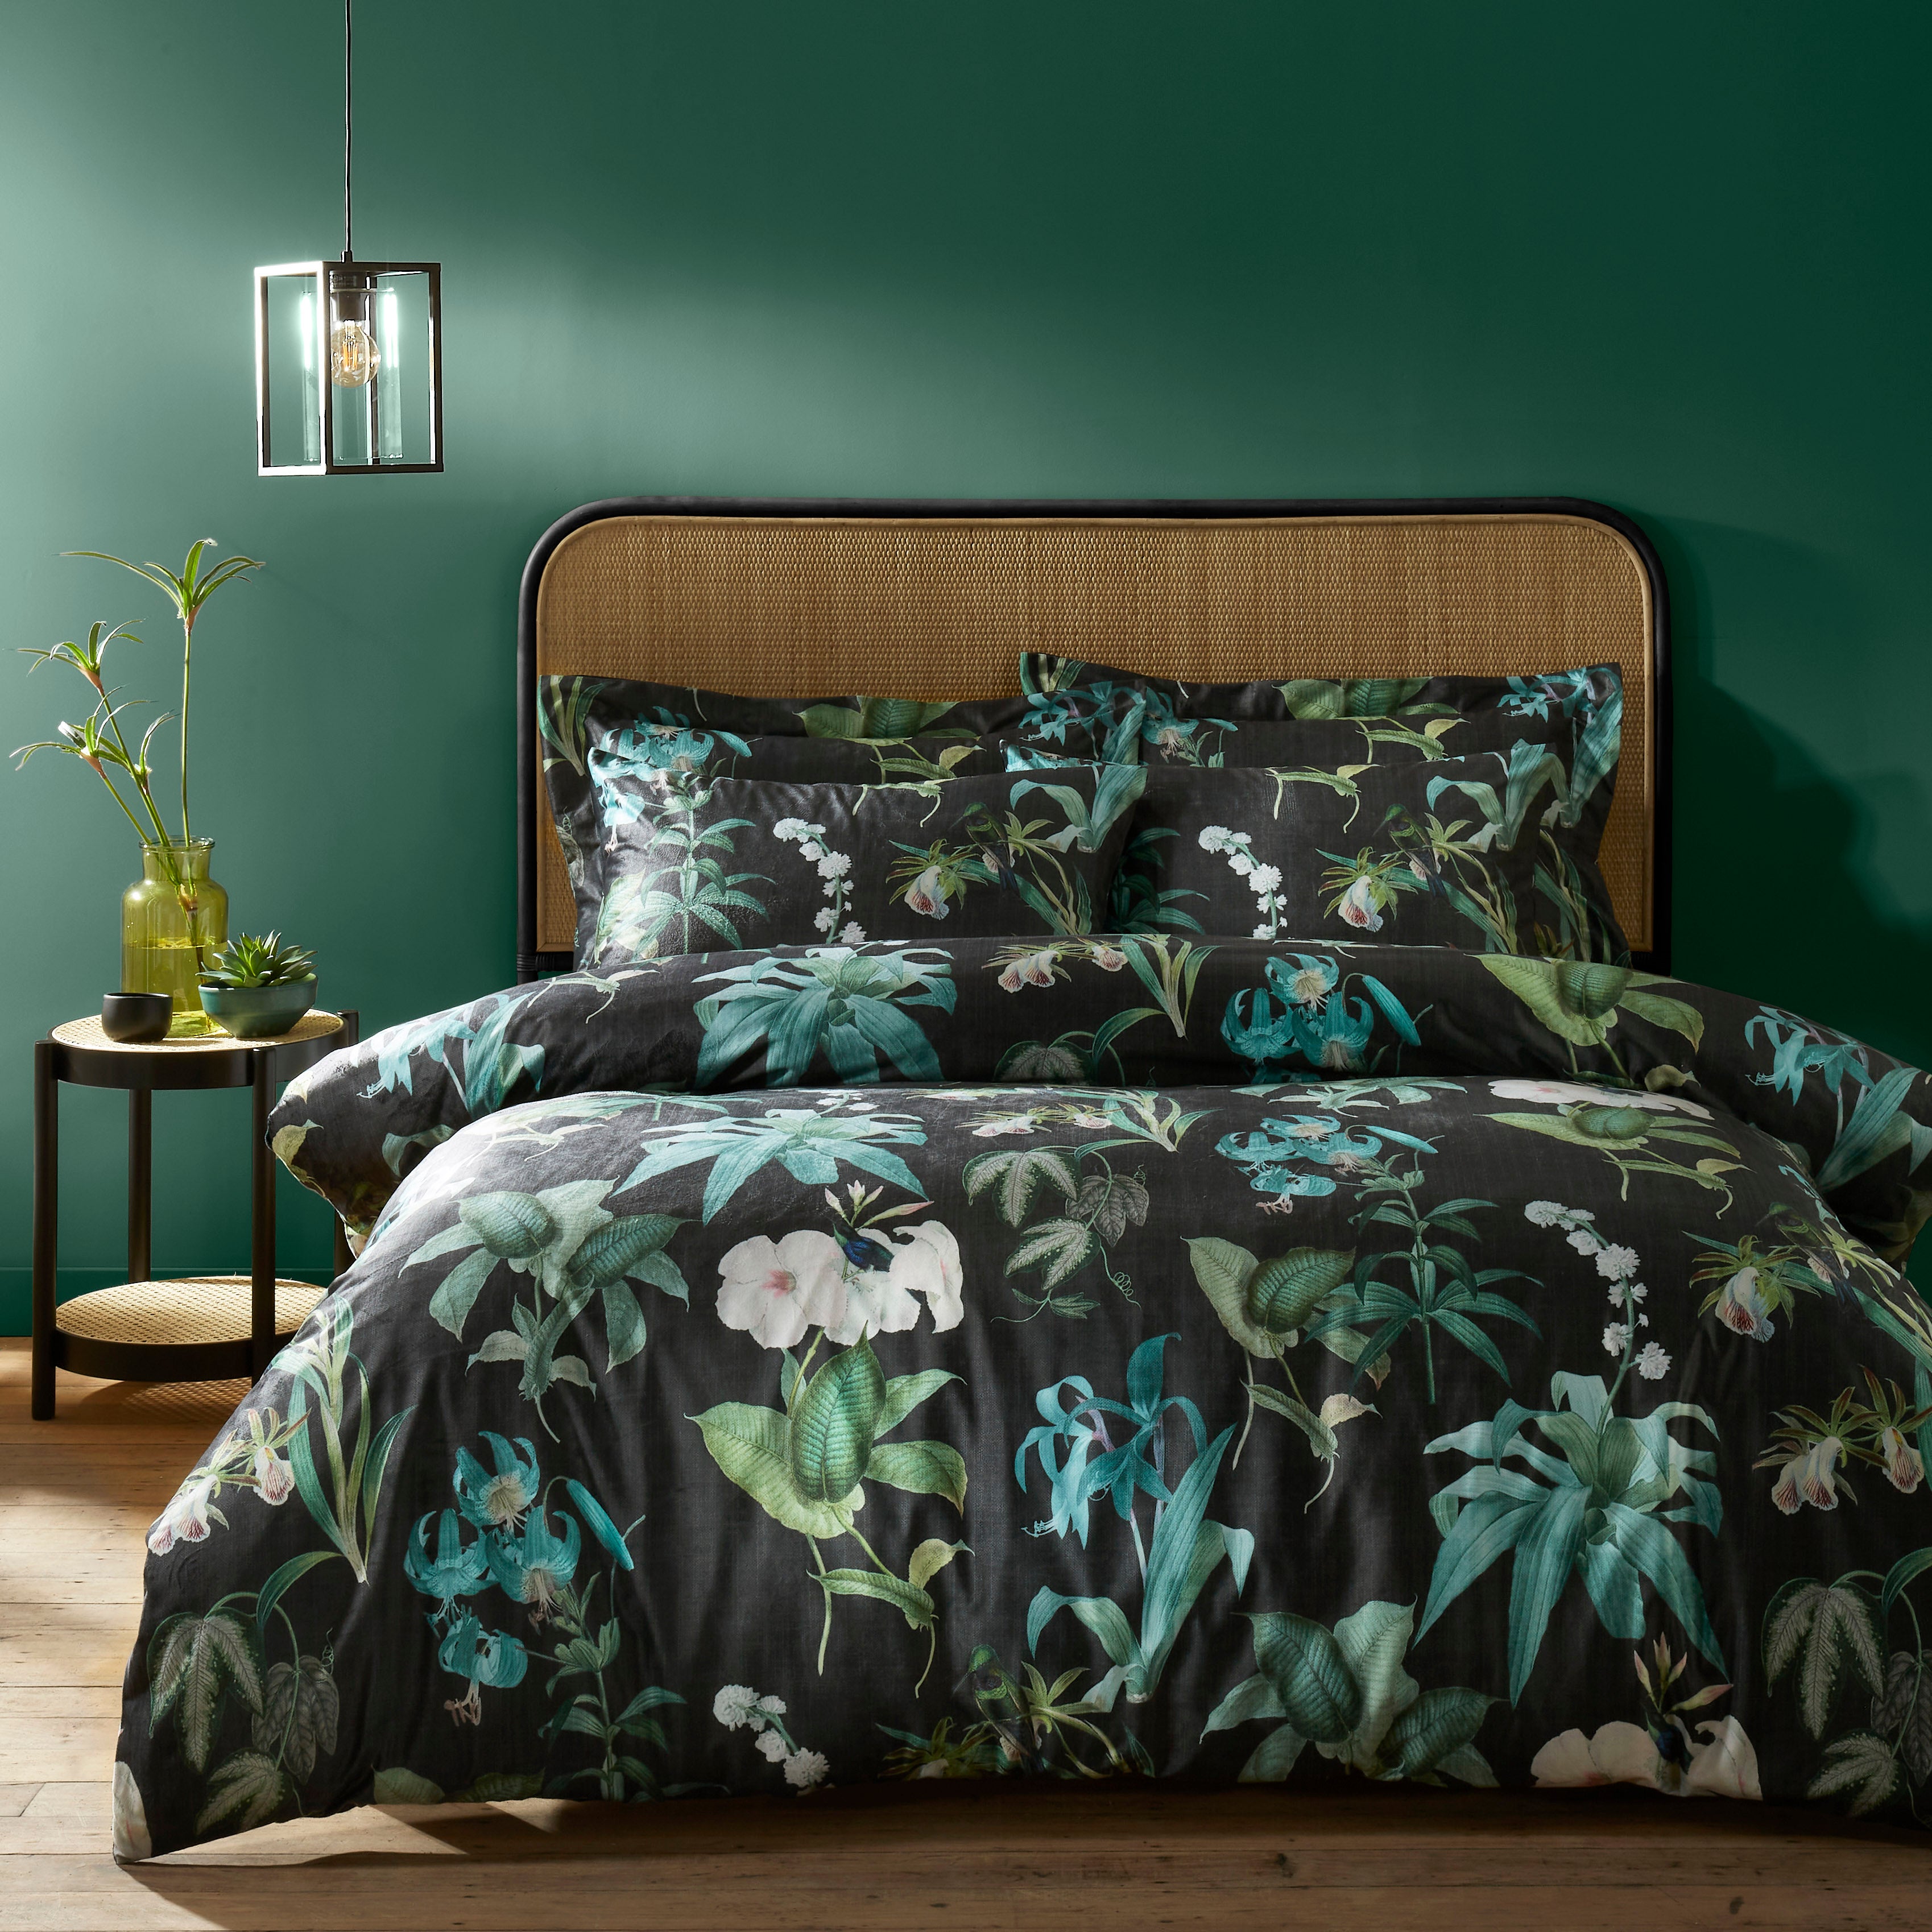 Duvet Covers & Sets - Bedding Collections | Dunelm | Page 8